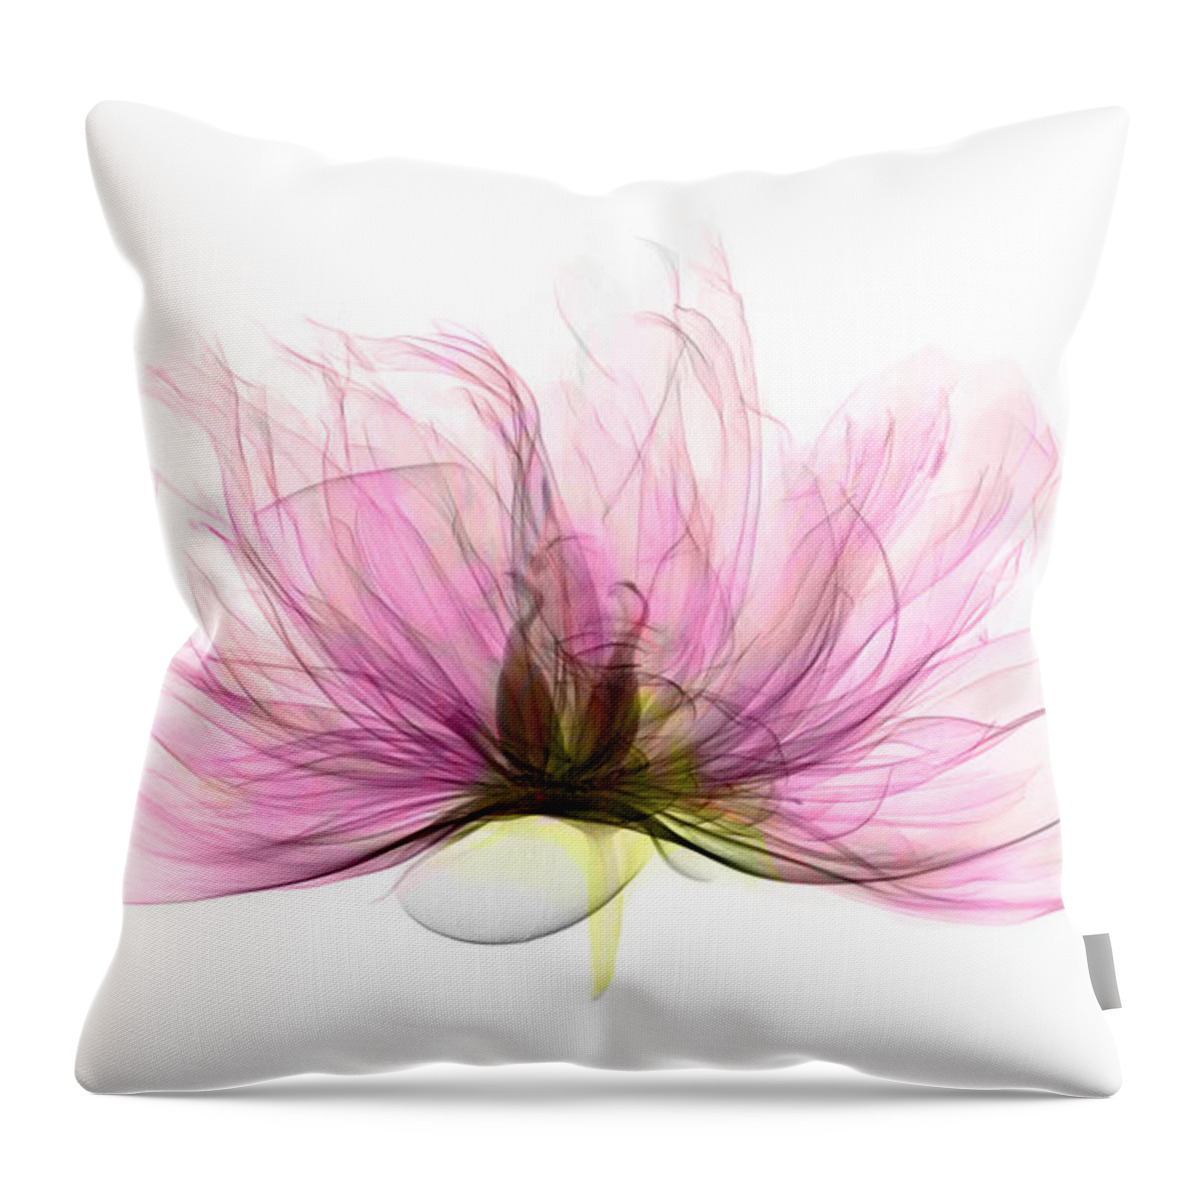 Xray Throw Pillow featuring the photograph X-ray Of Peony Flower by Ted Kinsman